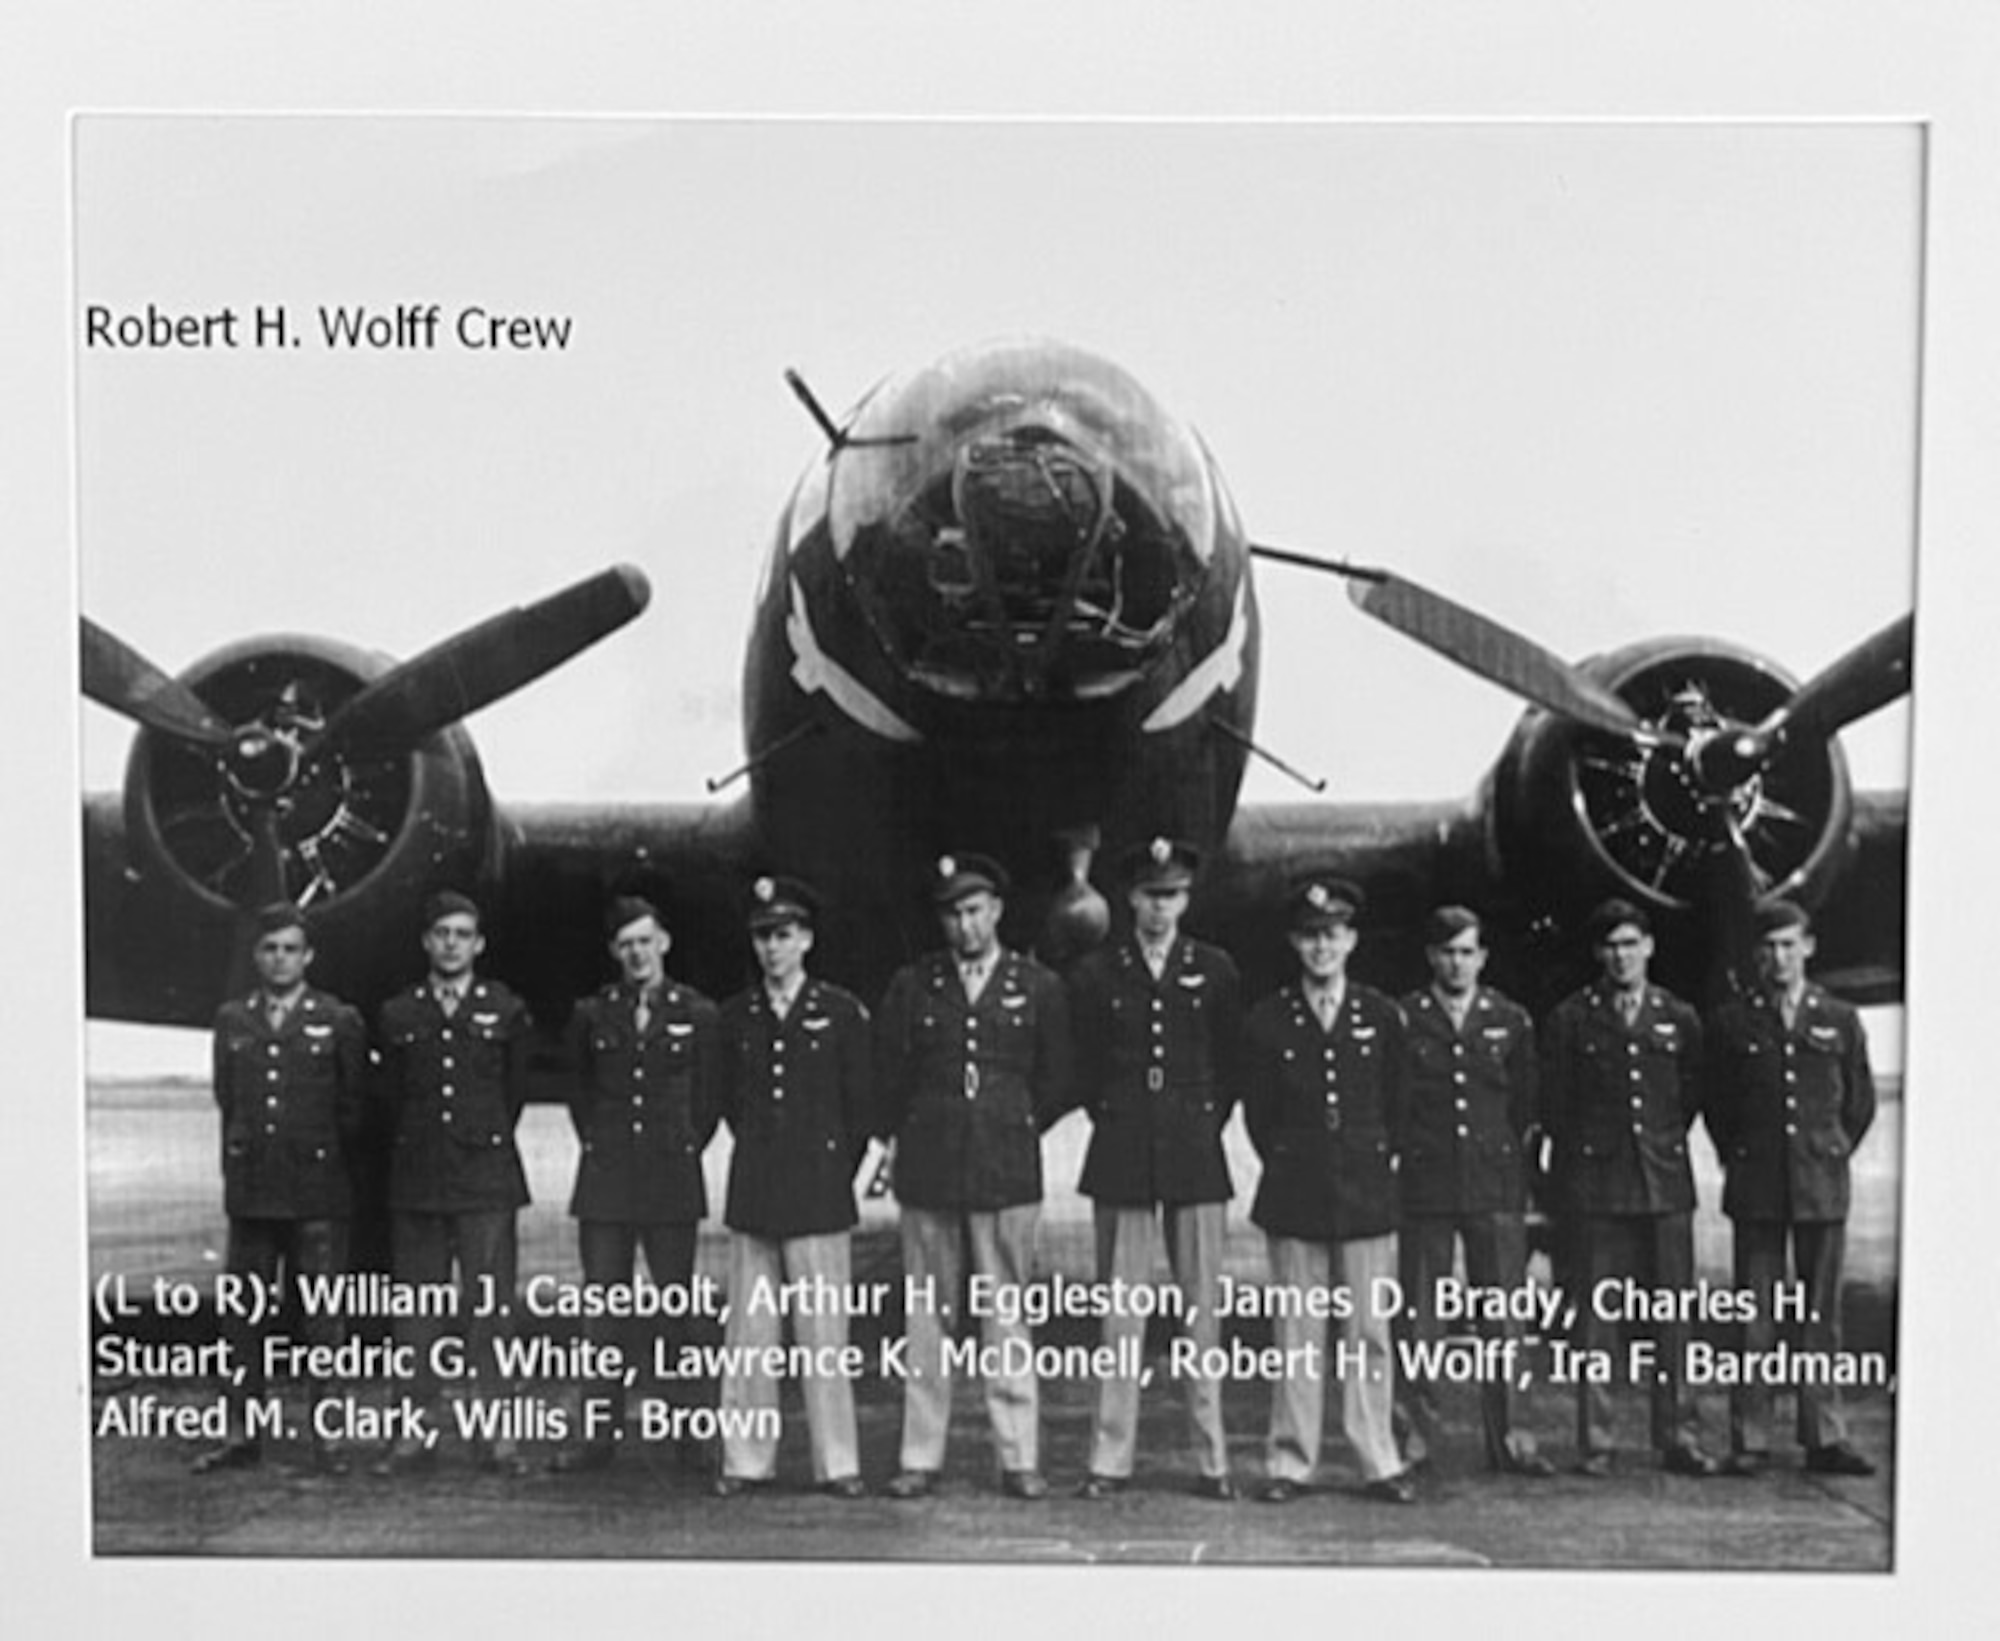 U.S. Army Air Forces 2nd Lt. Robert “Bob” Wolff, fourth right, and his crew pose for a photo by a B-17 Flying Fortress training aircraft in the United States June 1, 1943. Wolff was a B-17 pilot with the 100th Bomb Group, Thorpe Abbotts, England, and along with his crew, was kept as a prisoner-of-war at Stalag Luft III, Germany, for approximately 18 months. (Photo courtesy of Bob Wolff and 100th Bomb Group Foundation website)